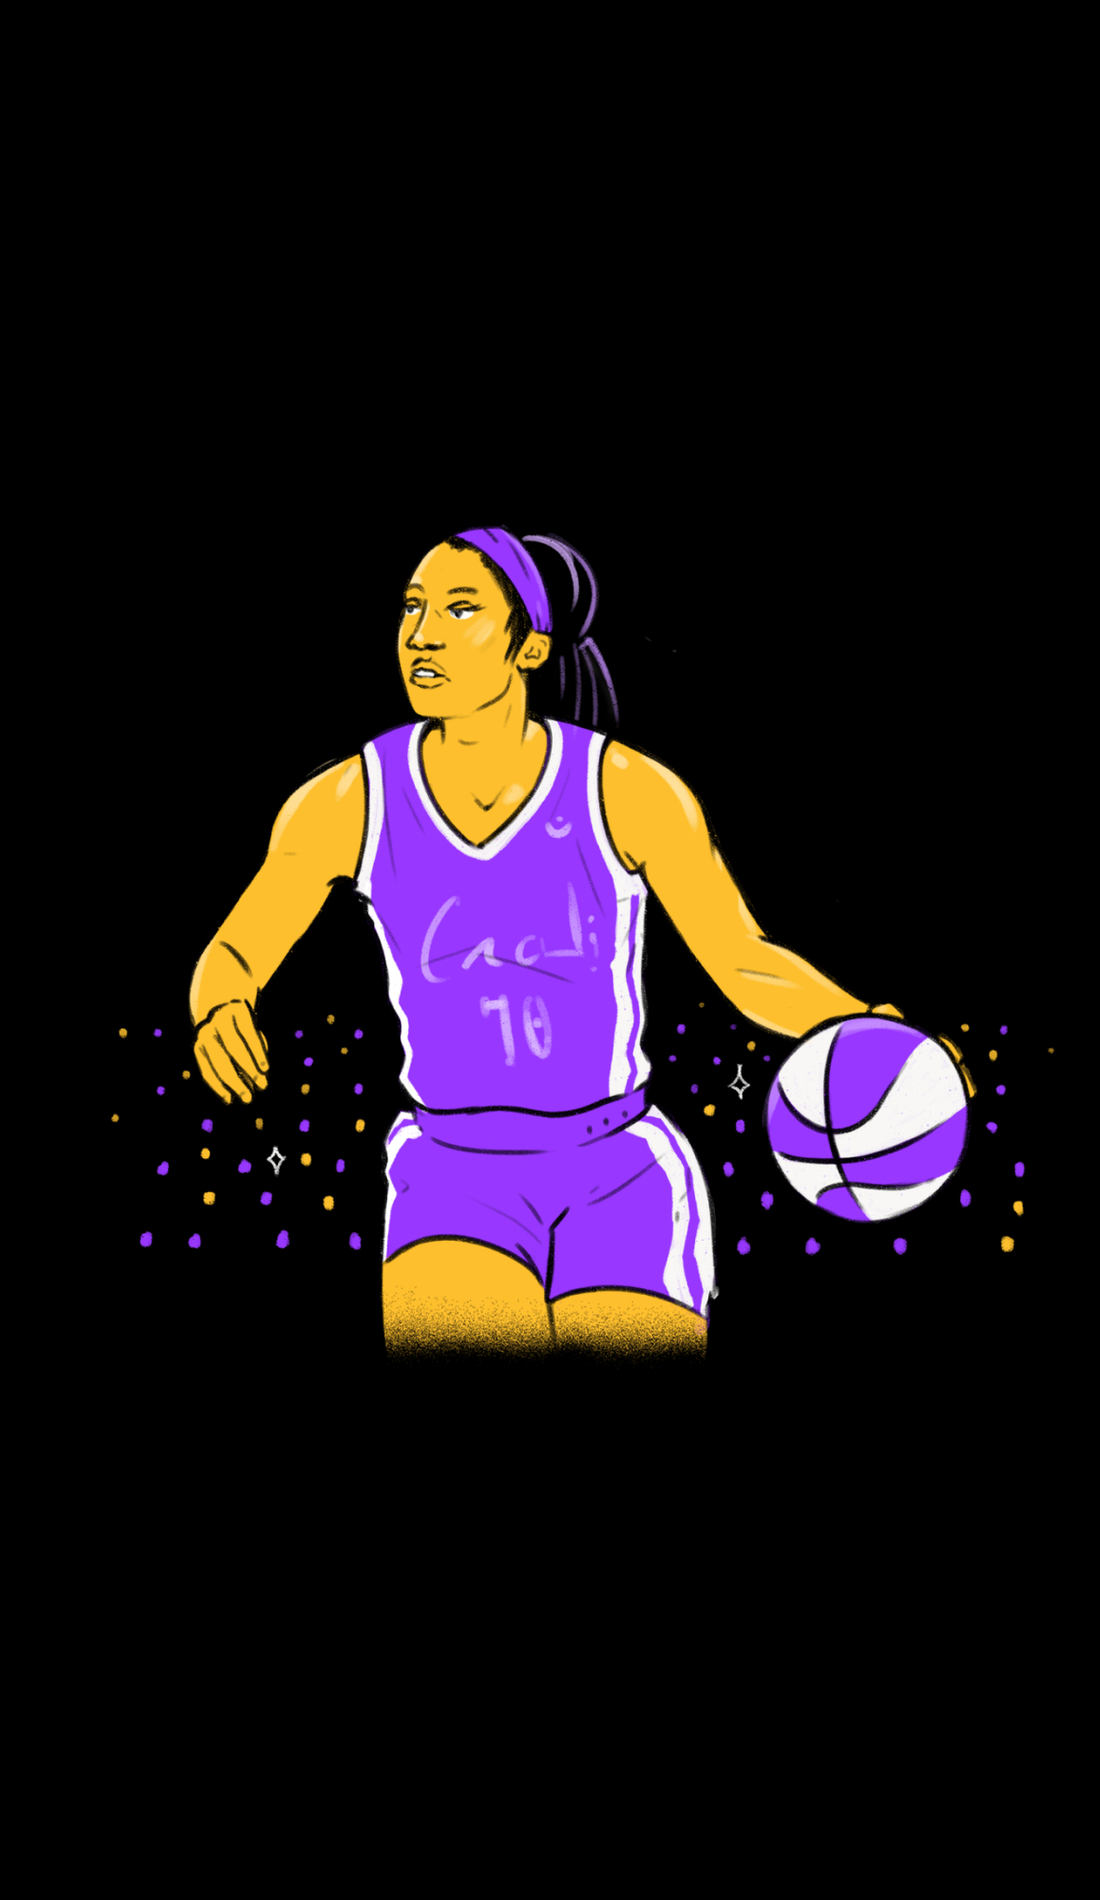 A Albany Great Danes Womens Basketball live event